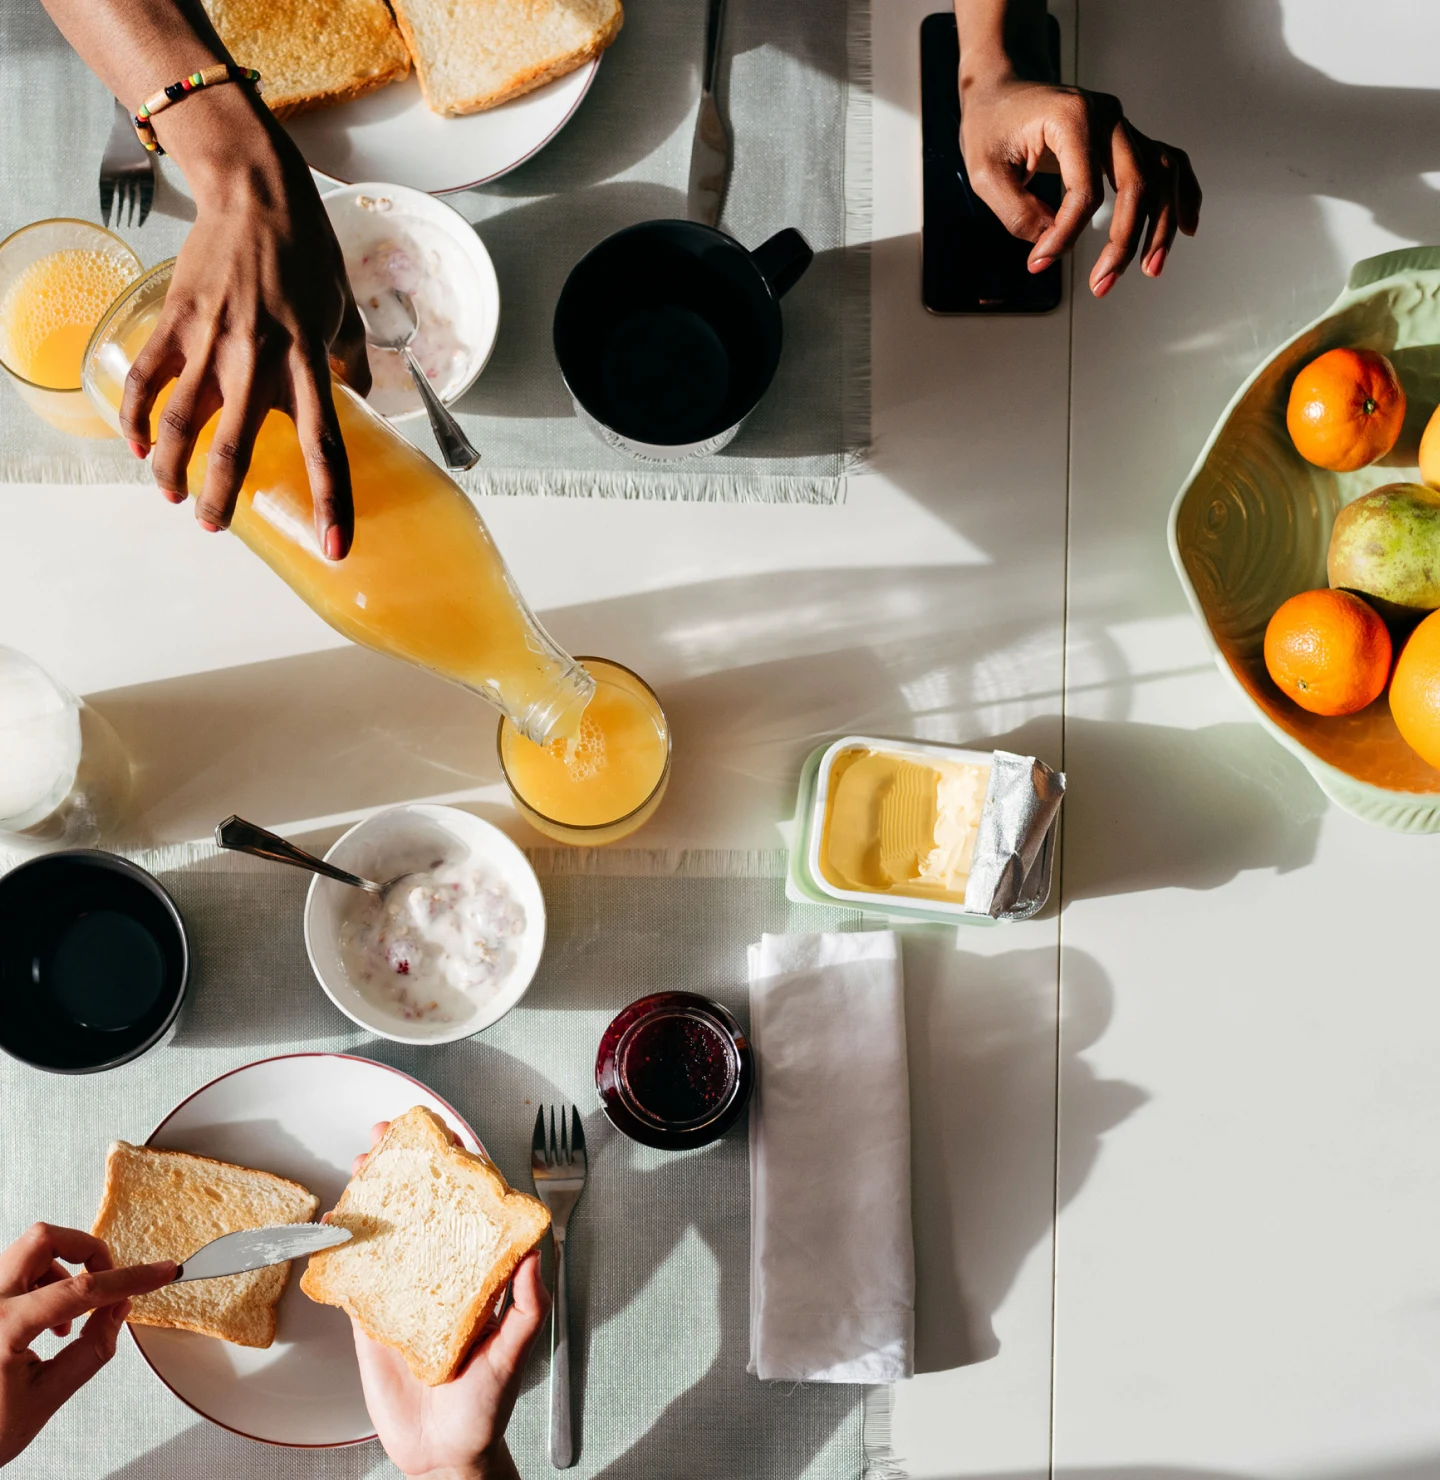 Overhead view of a breakfast table with hands pouring juice and buttering toast